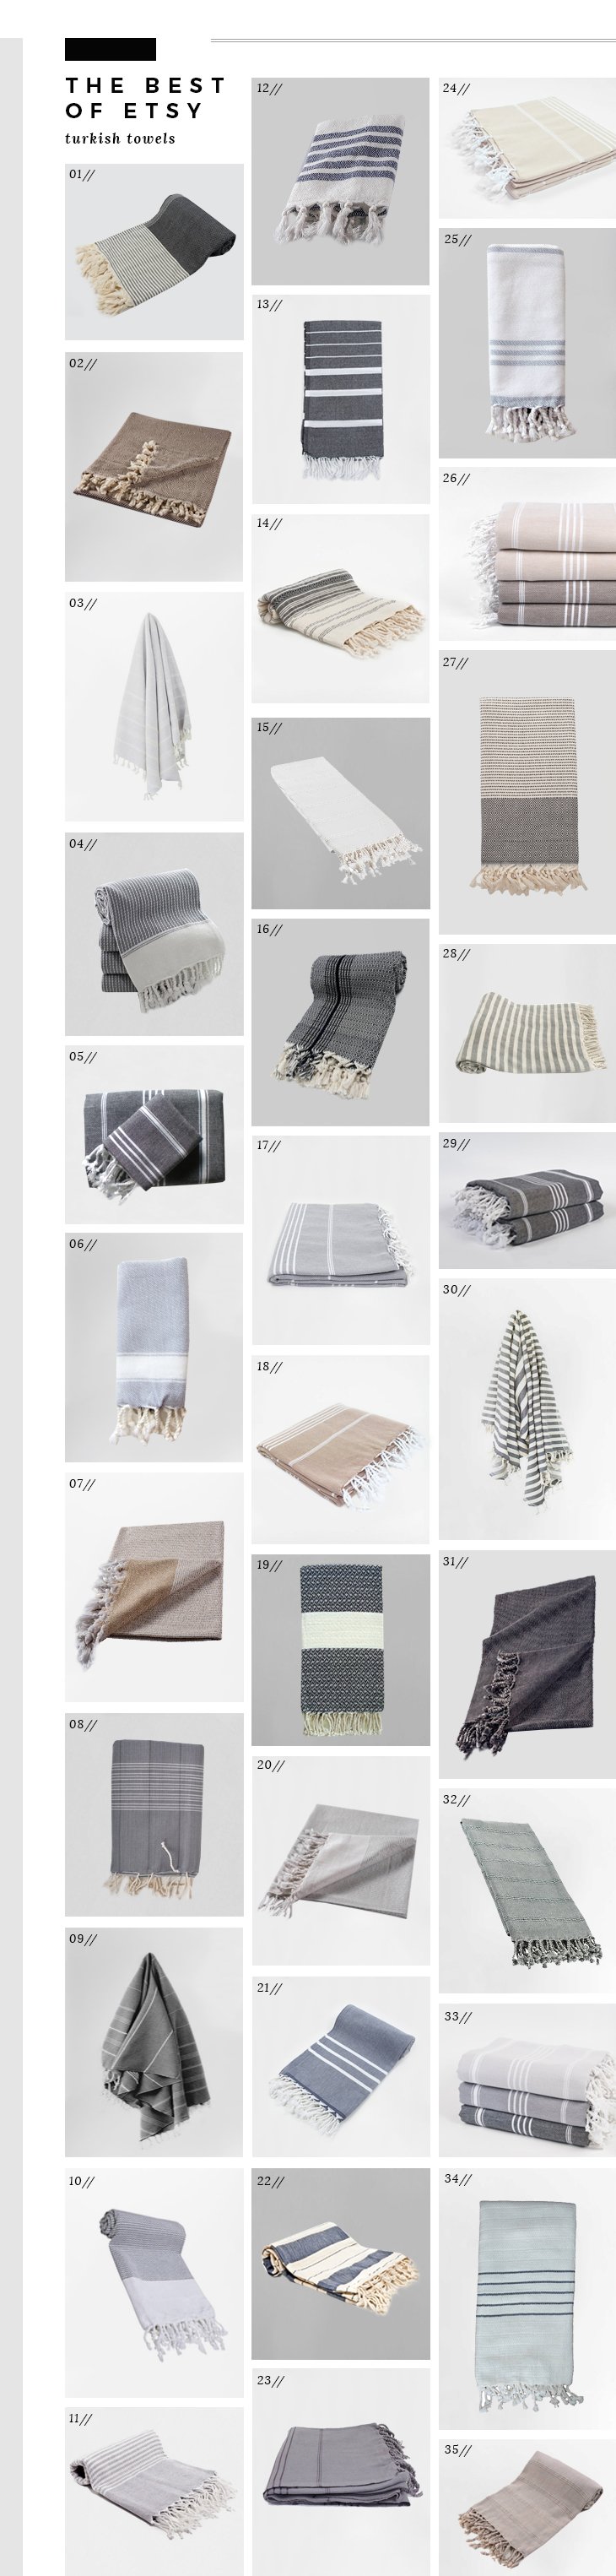 Best of Etsy - Turkish Towels